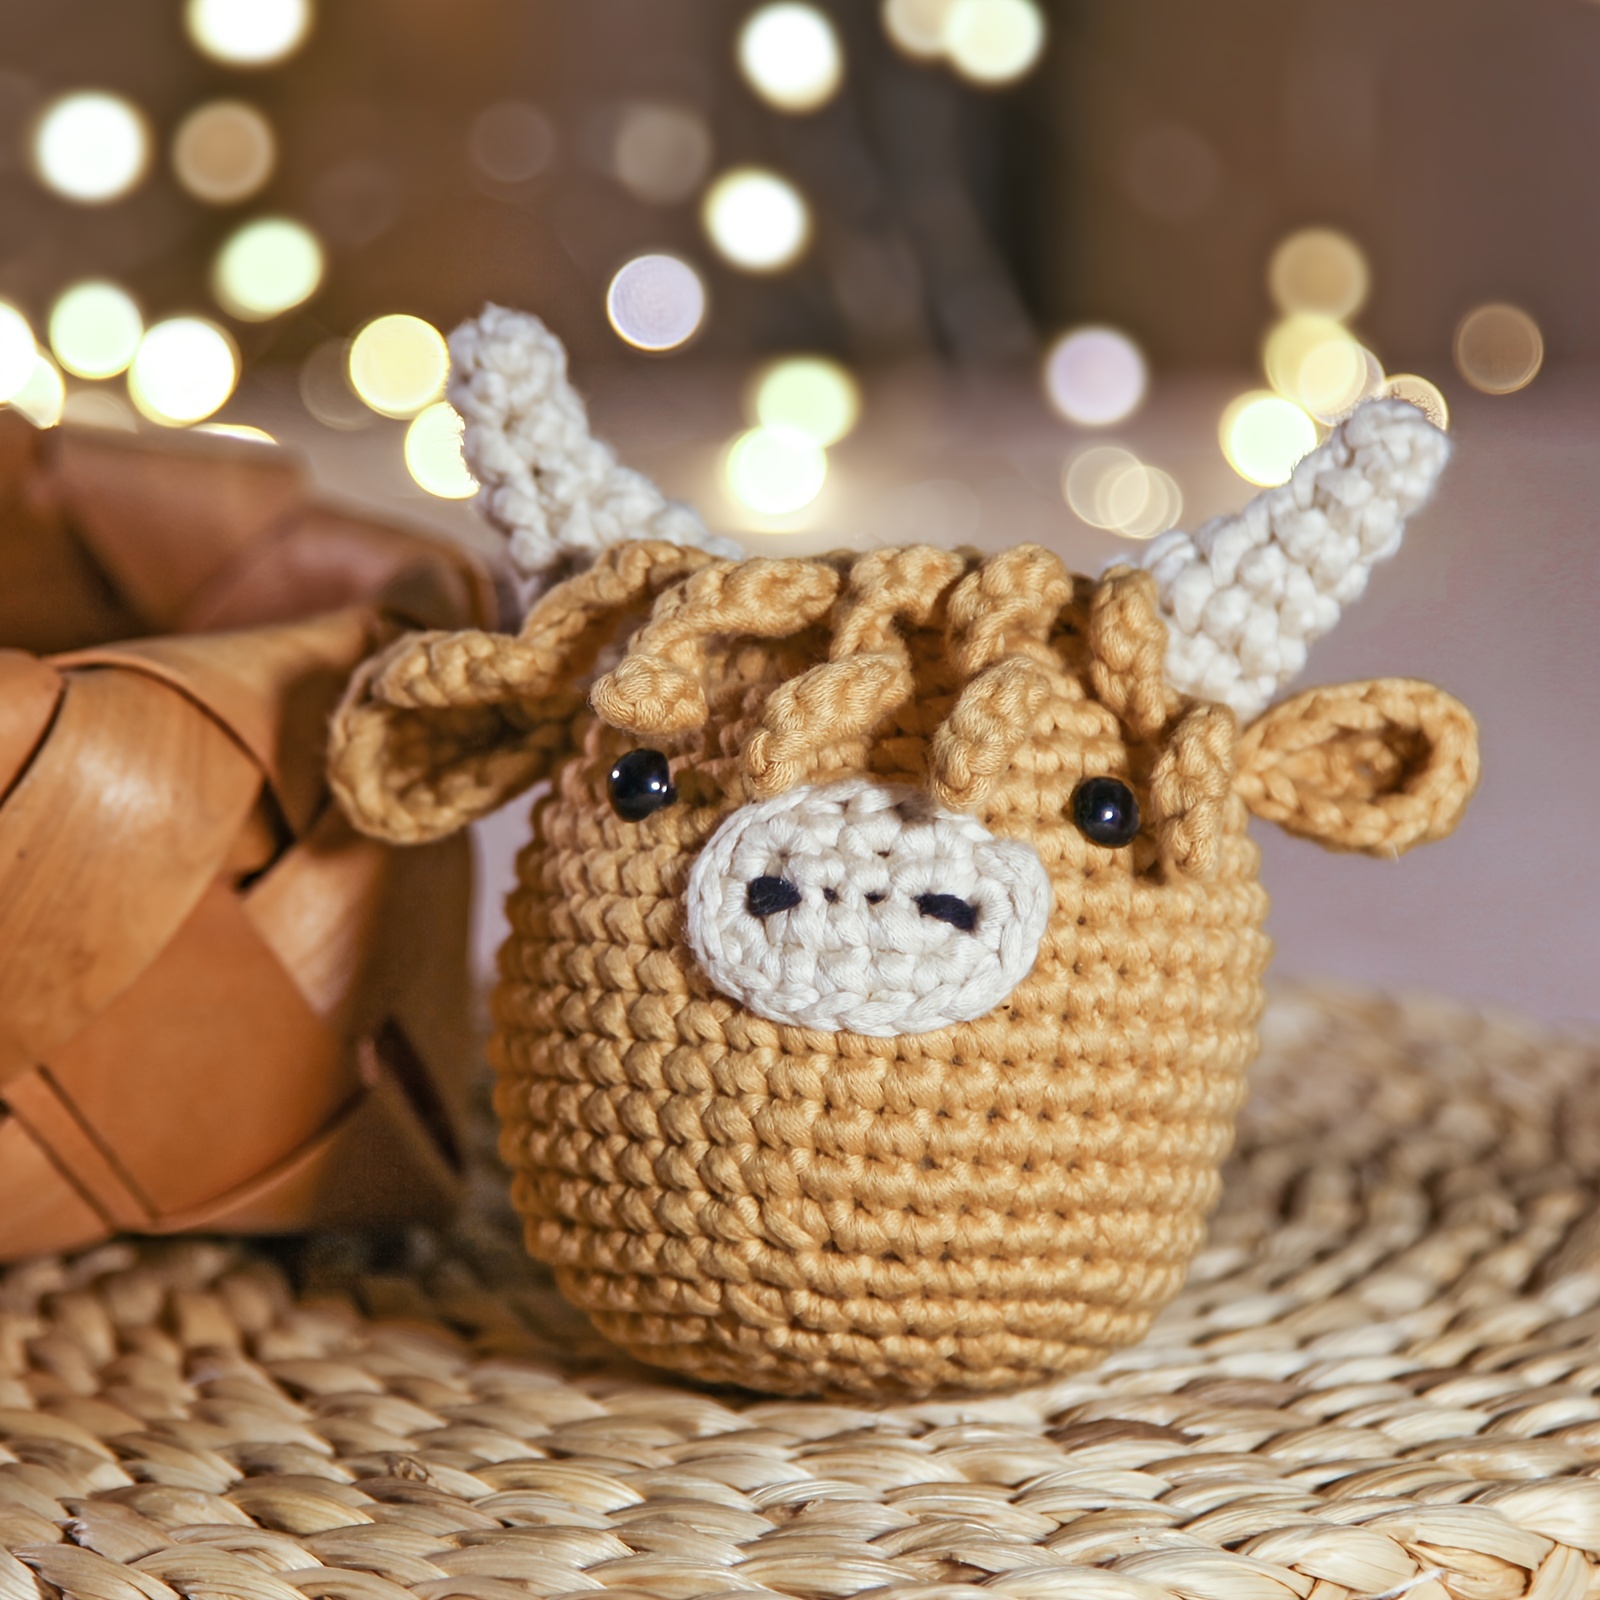 

Crochet Kit For Beginners: Highland Cow Crochet Kit, Learn To Crochet, Include Easy Knitting Soft Yarn, Step-by-step Video Tutorial, Hook, Holiday Birthday Gift For Adults